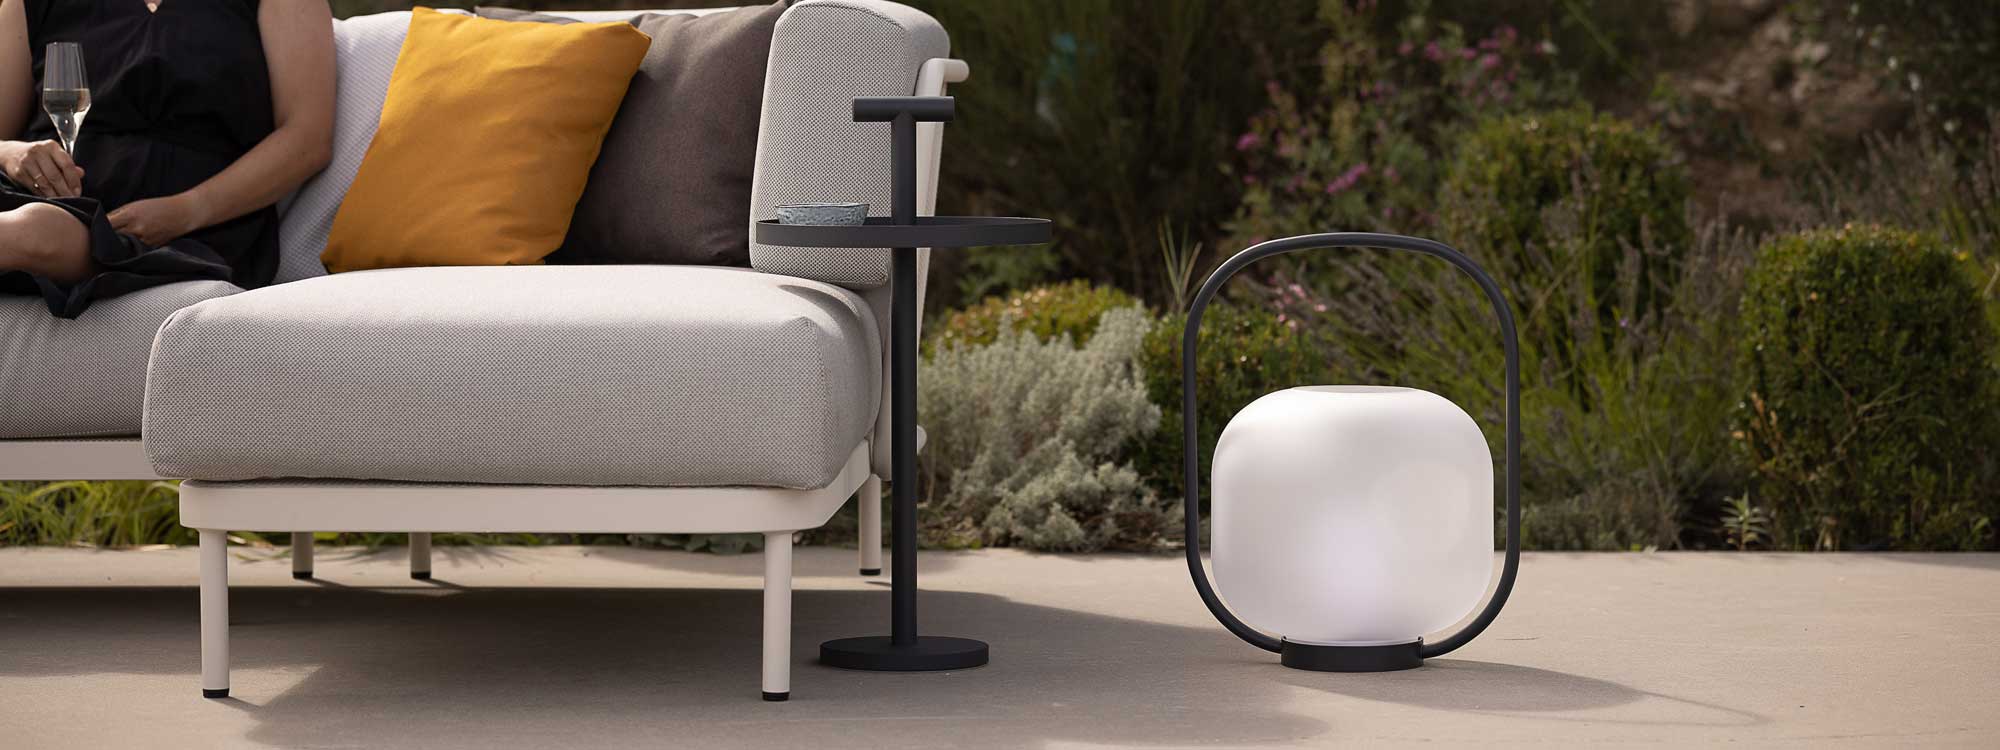 Image of Todus Albus modern outdoor side table with handle, next to Otus lantern and Baza garden sofa